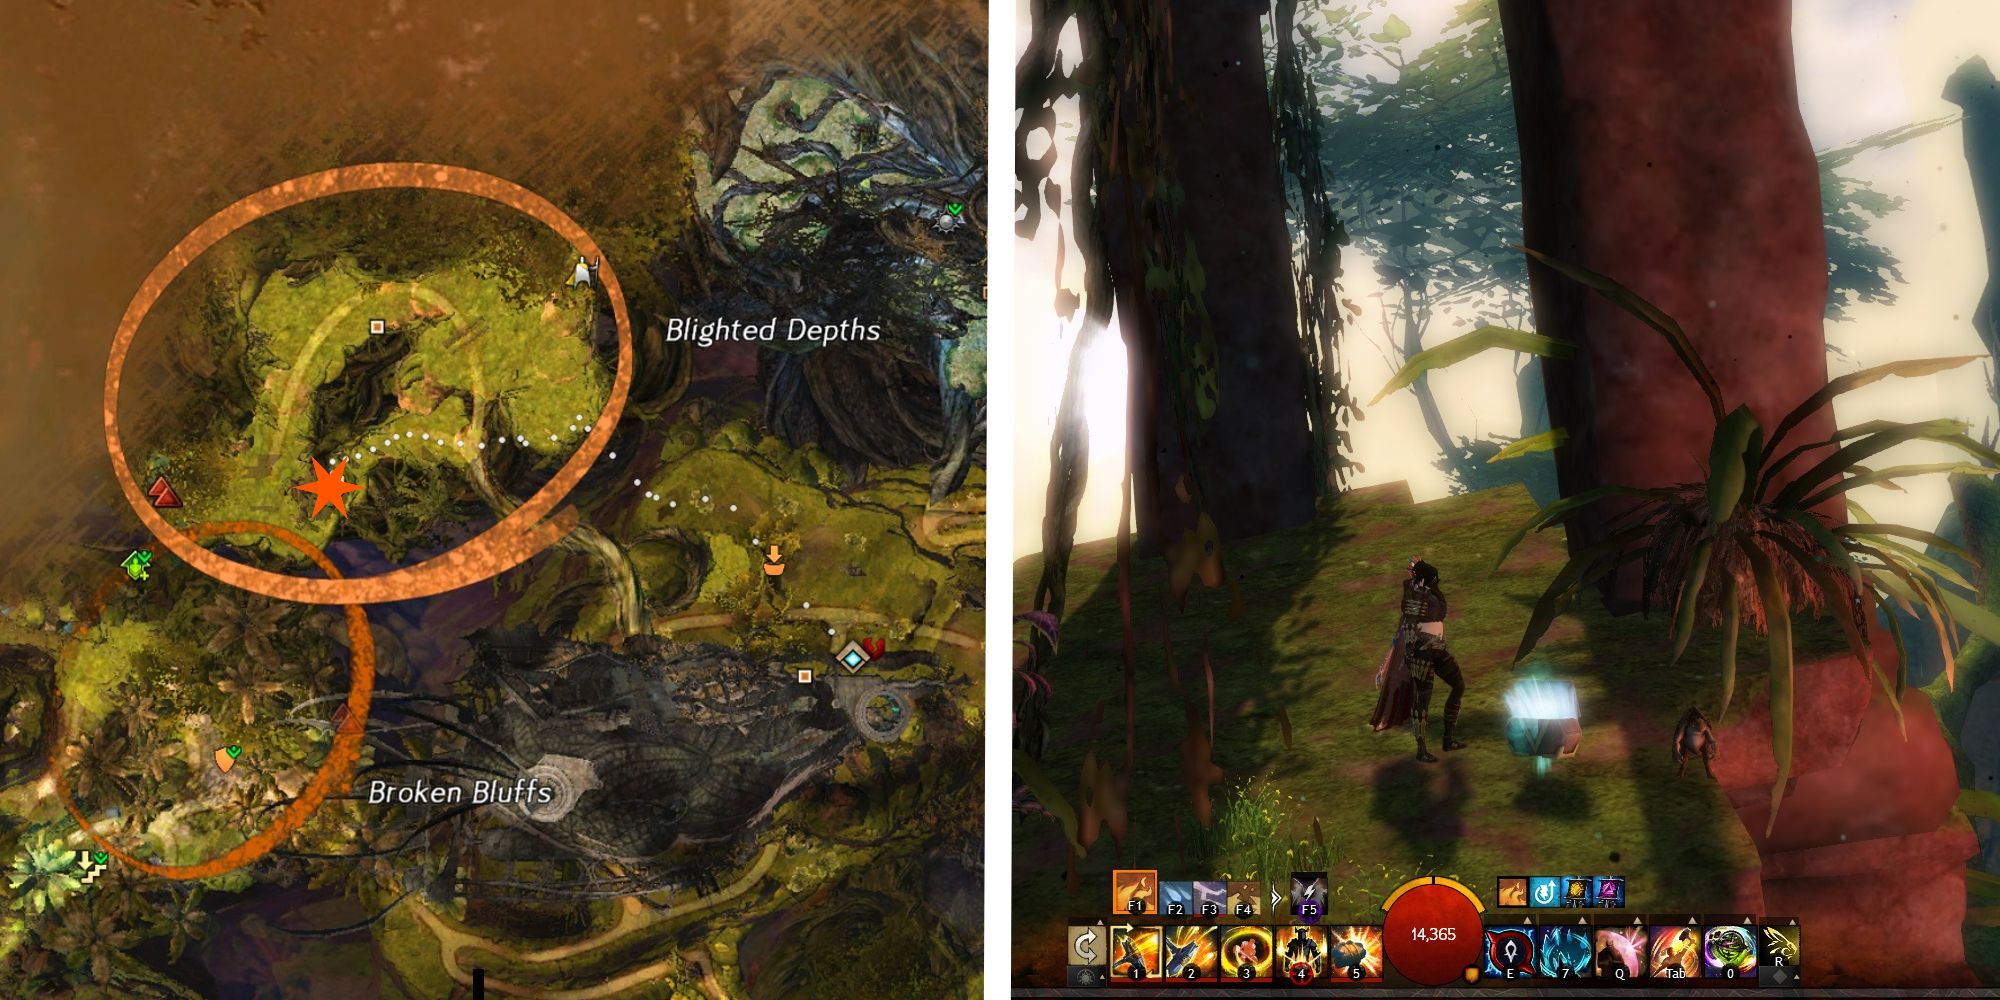 Mellaggan's Valor strongbox map location, next to image of player standing at strongbox